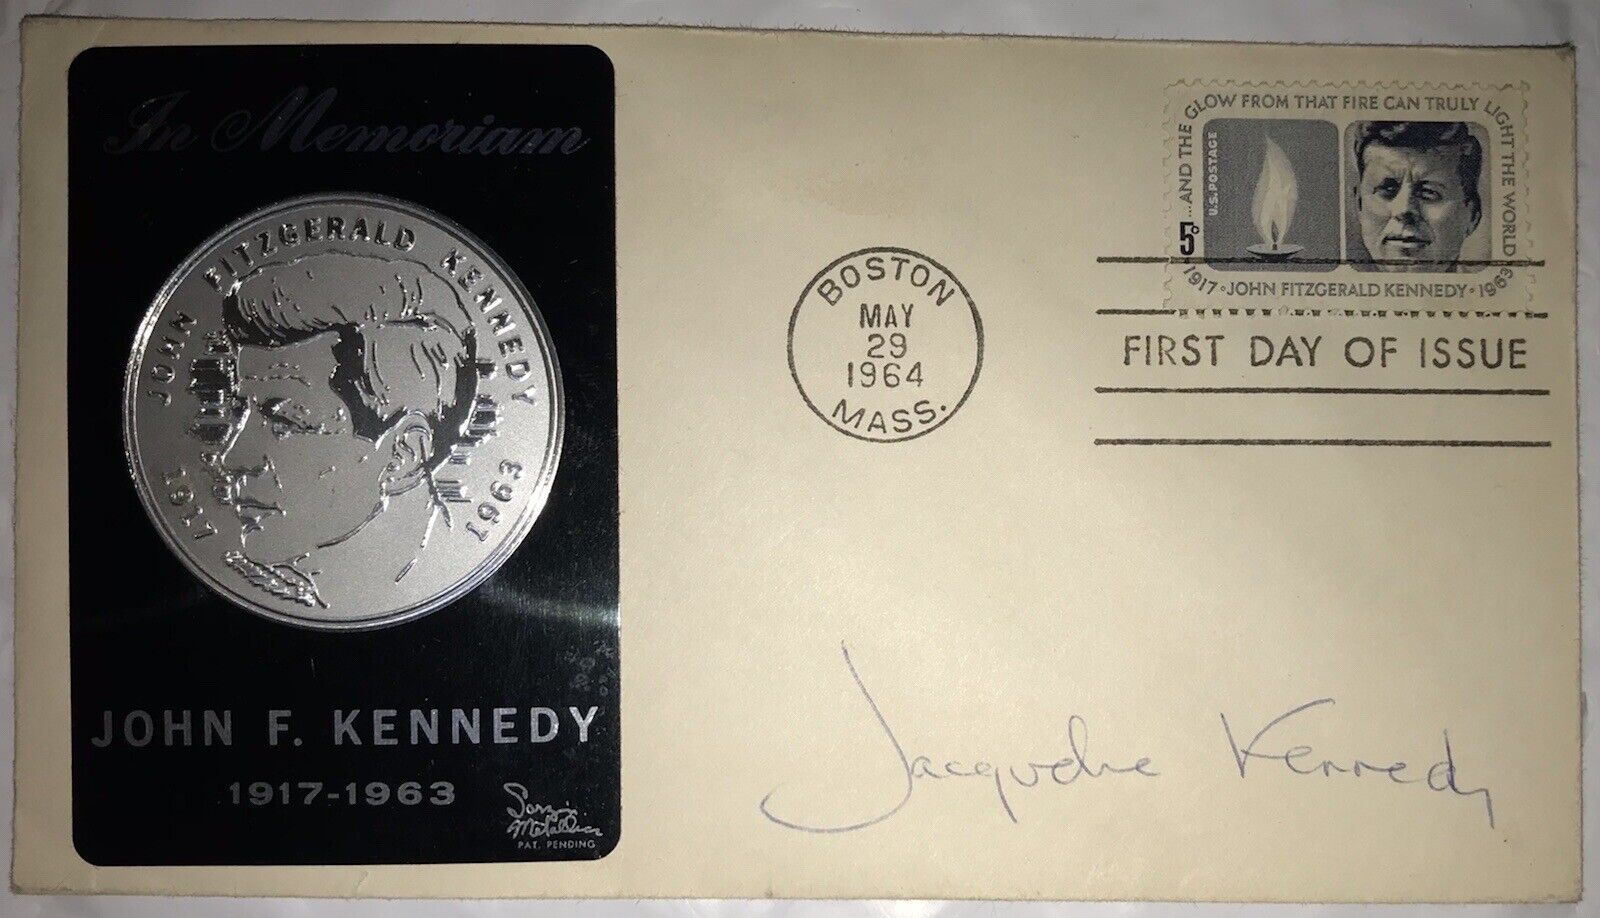 VERY RARE Jacqueline Kennedy Signed FDC JFK Assassination Dallas 11/22/63 Jackie